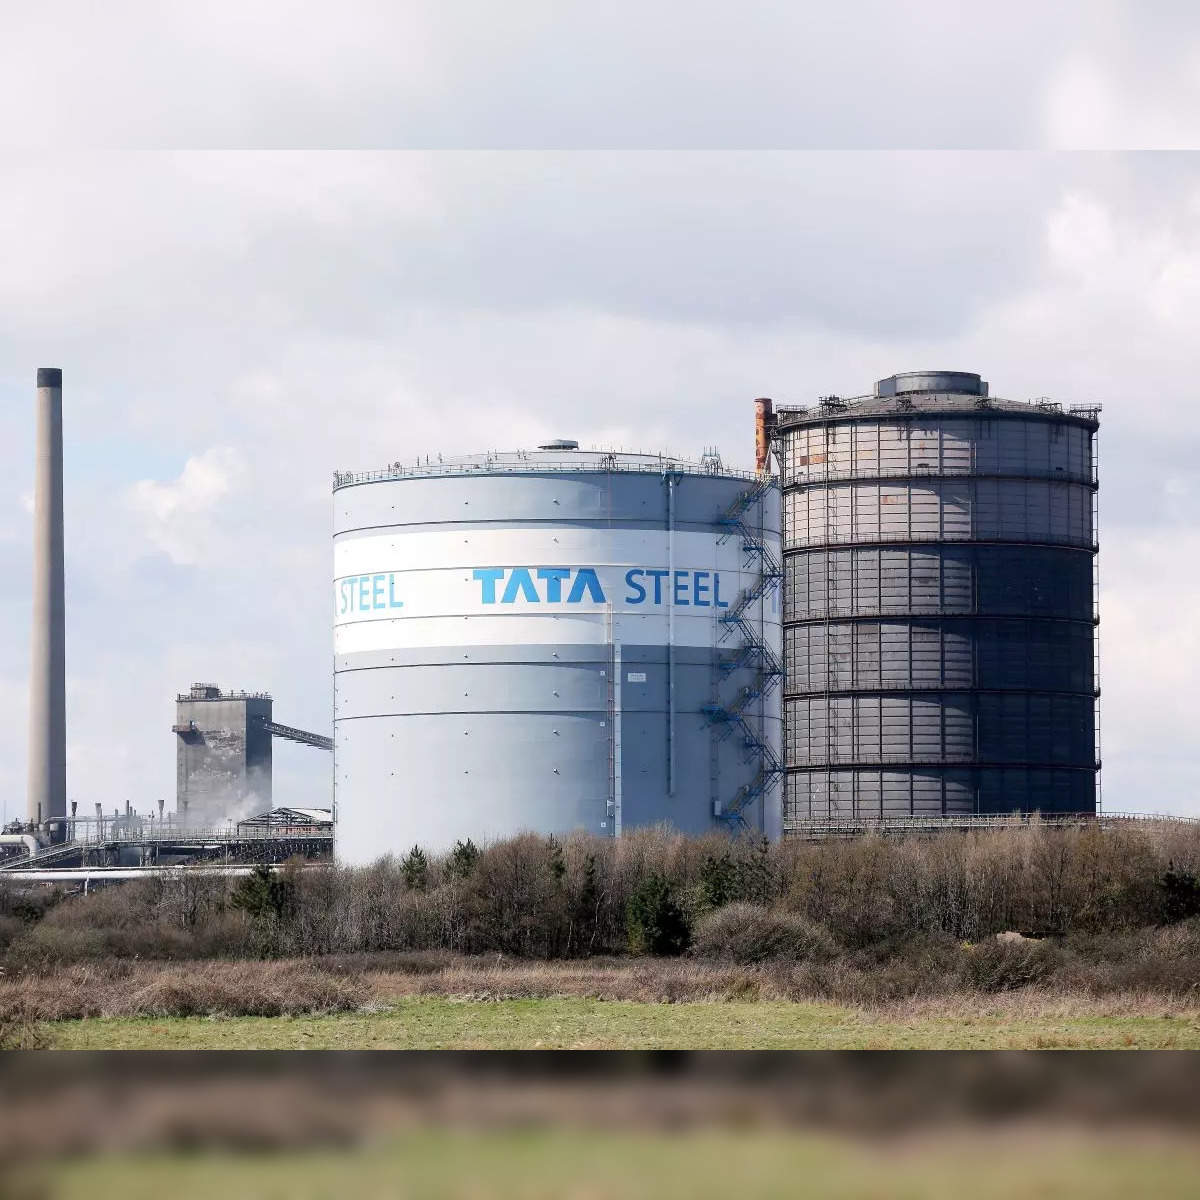 Tata Steel may put some European assets on the block - Hindustan Times